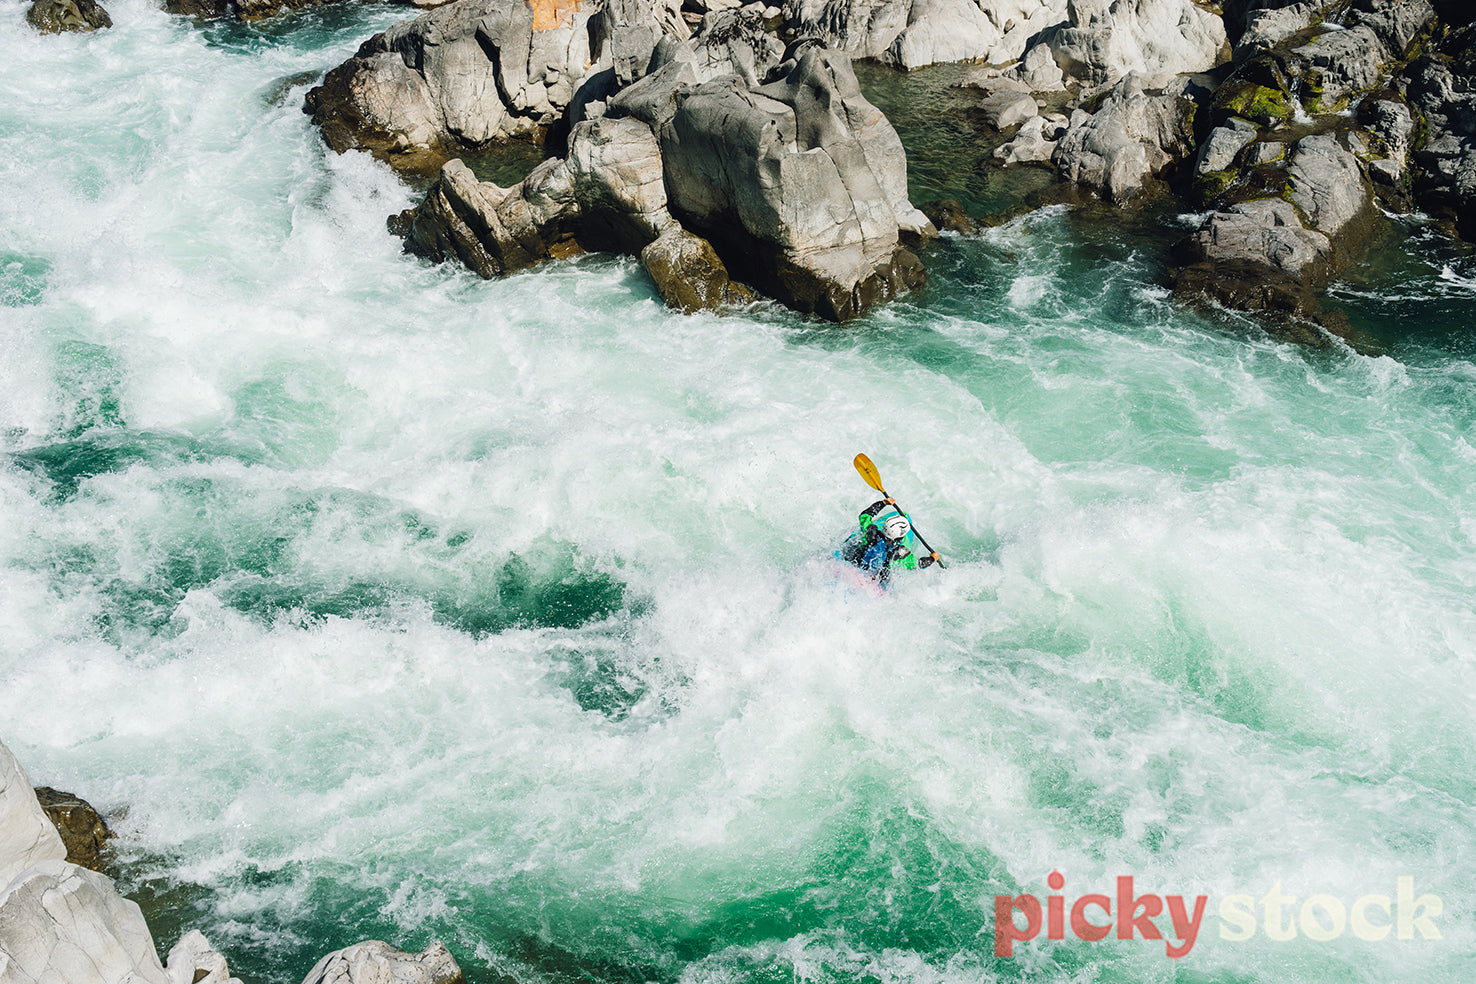 Whitewater kayaker in an ice cold rapid.